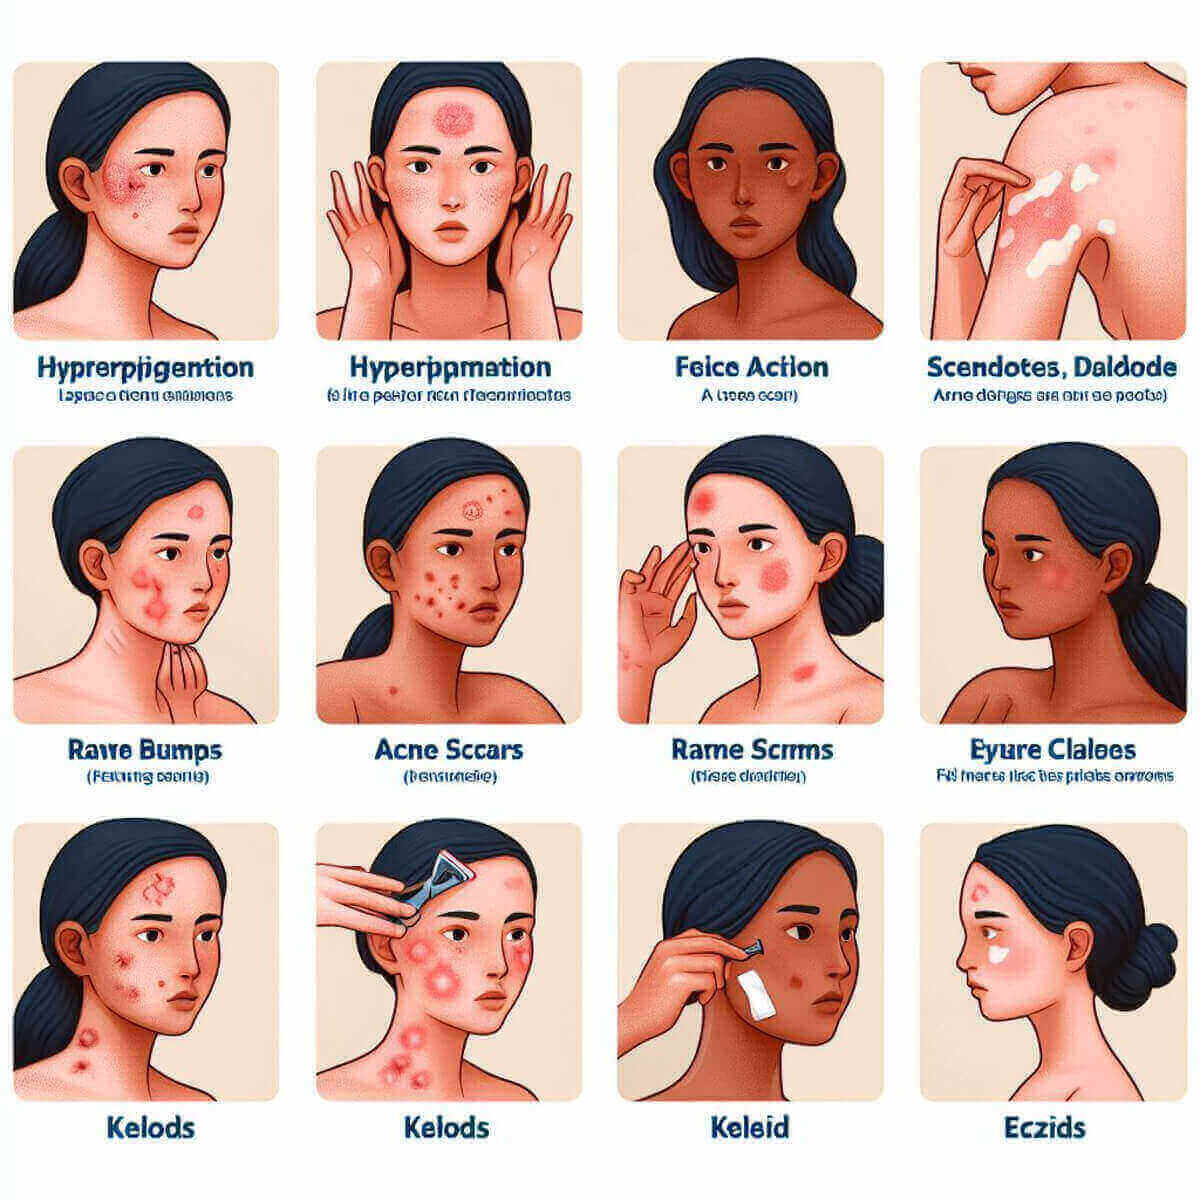 Skin Conditions in People of Color.